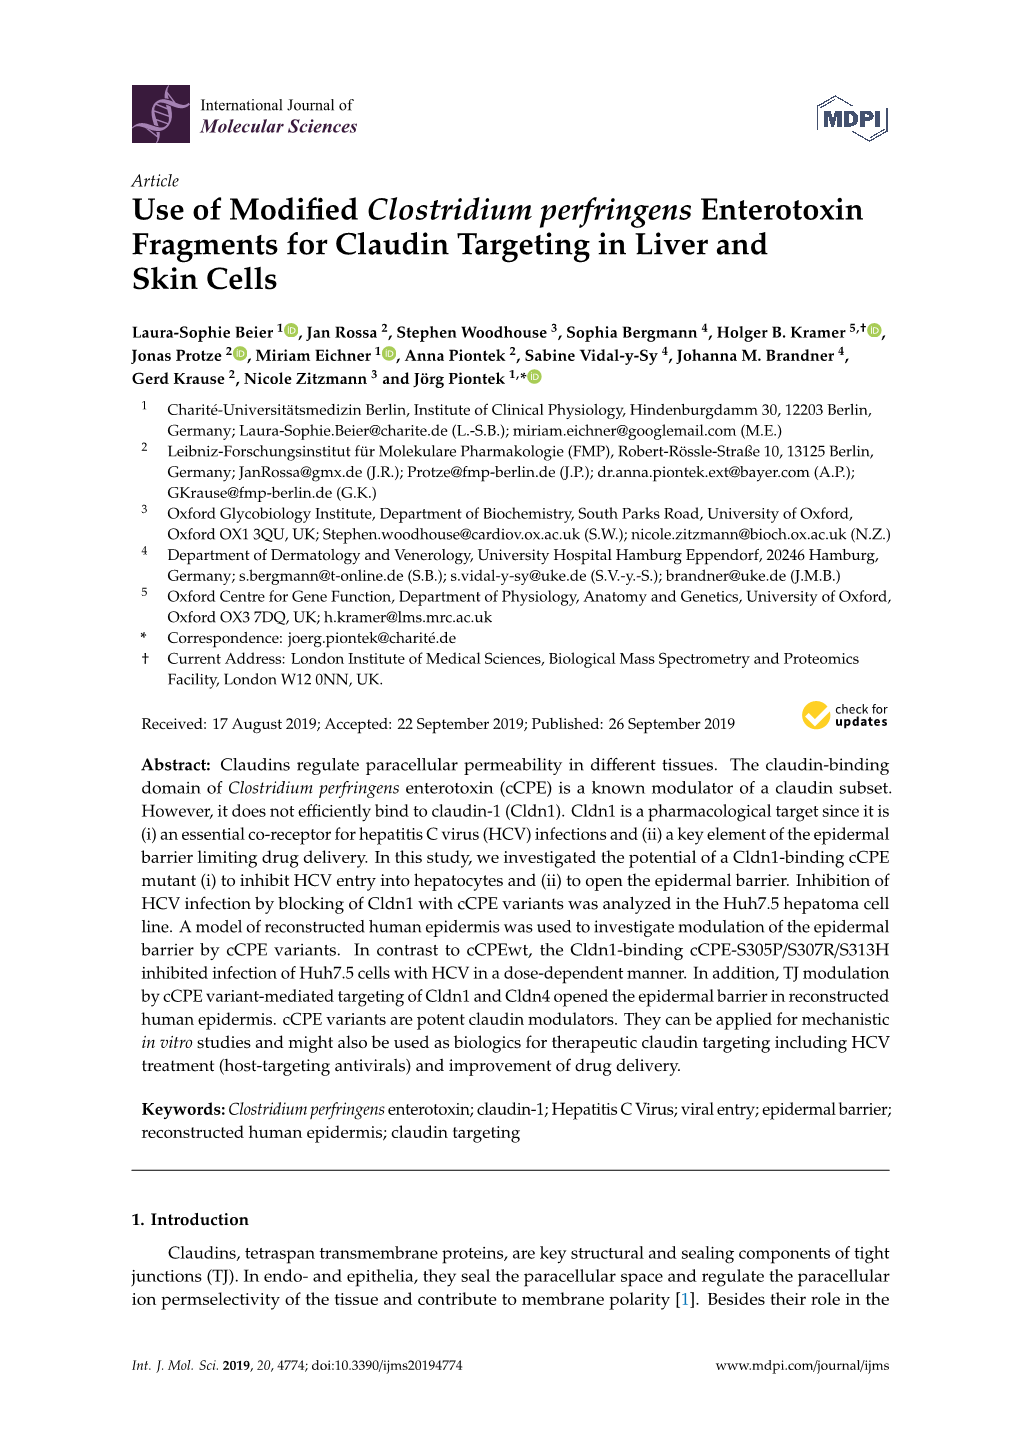 Use of Modified Clostridium Perfringens Enterotoxin Fragments for Claudin Targeting in Liver and Skin Cells